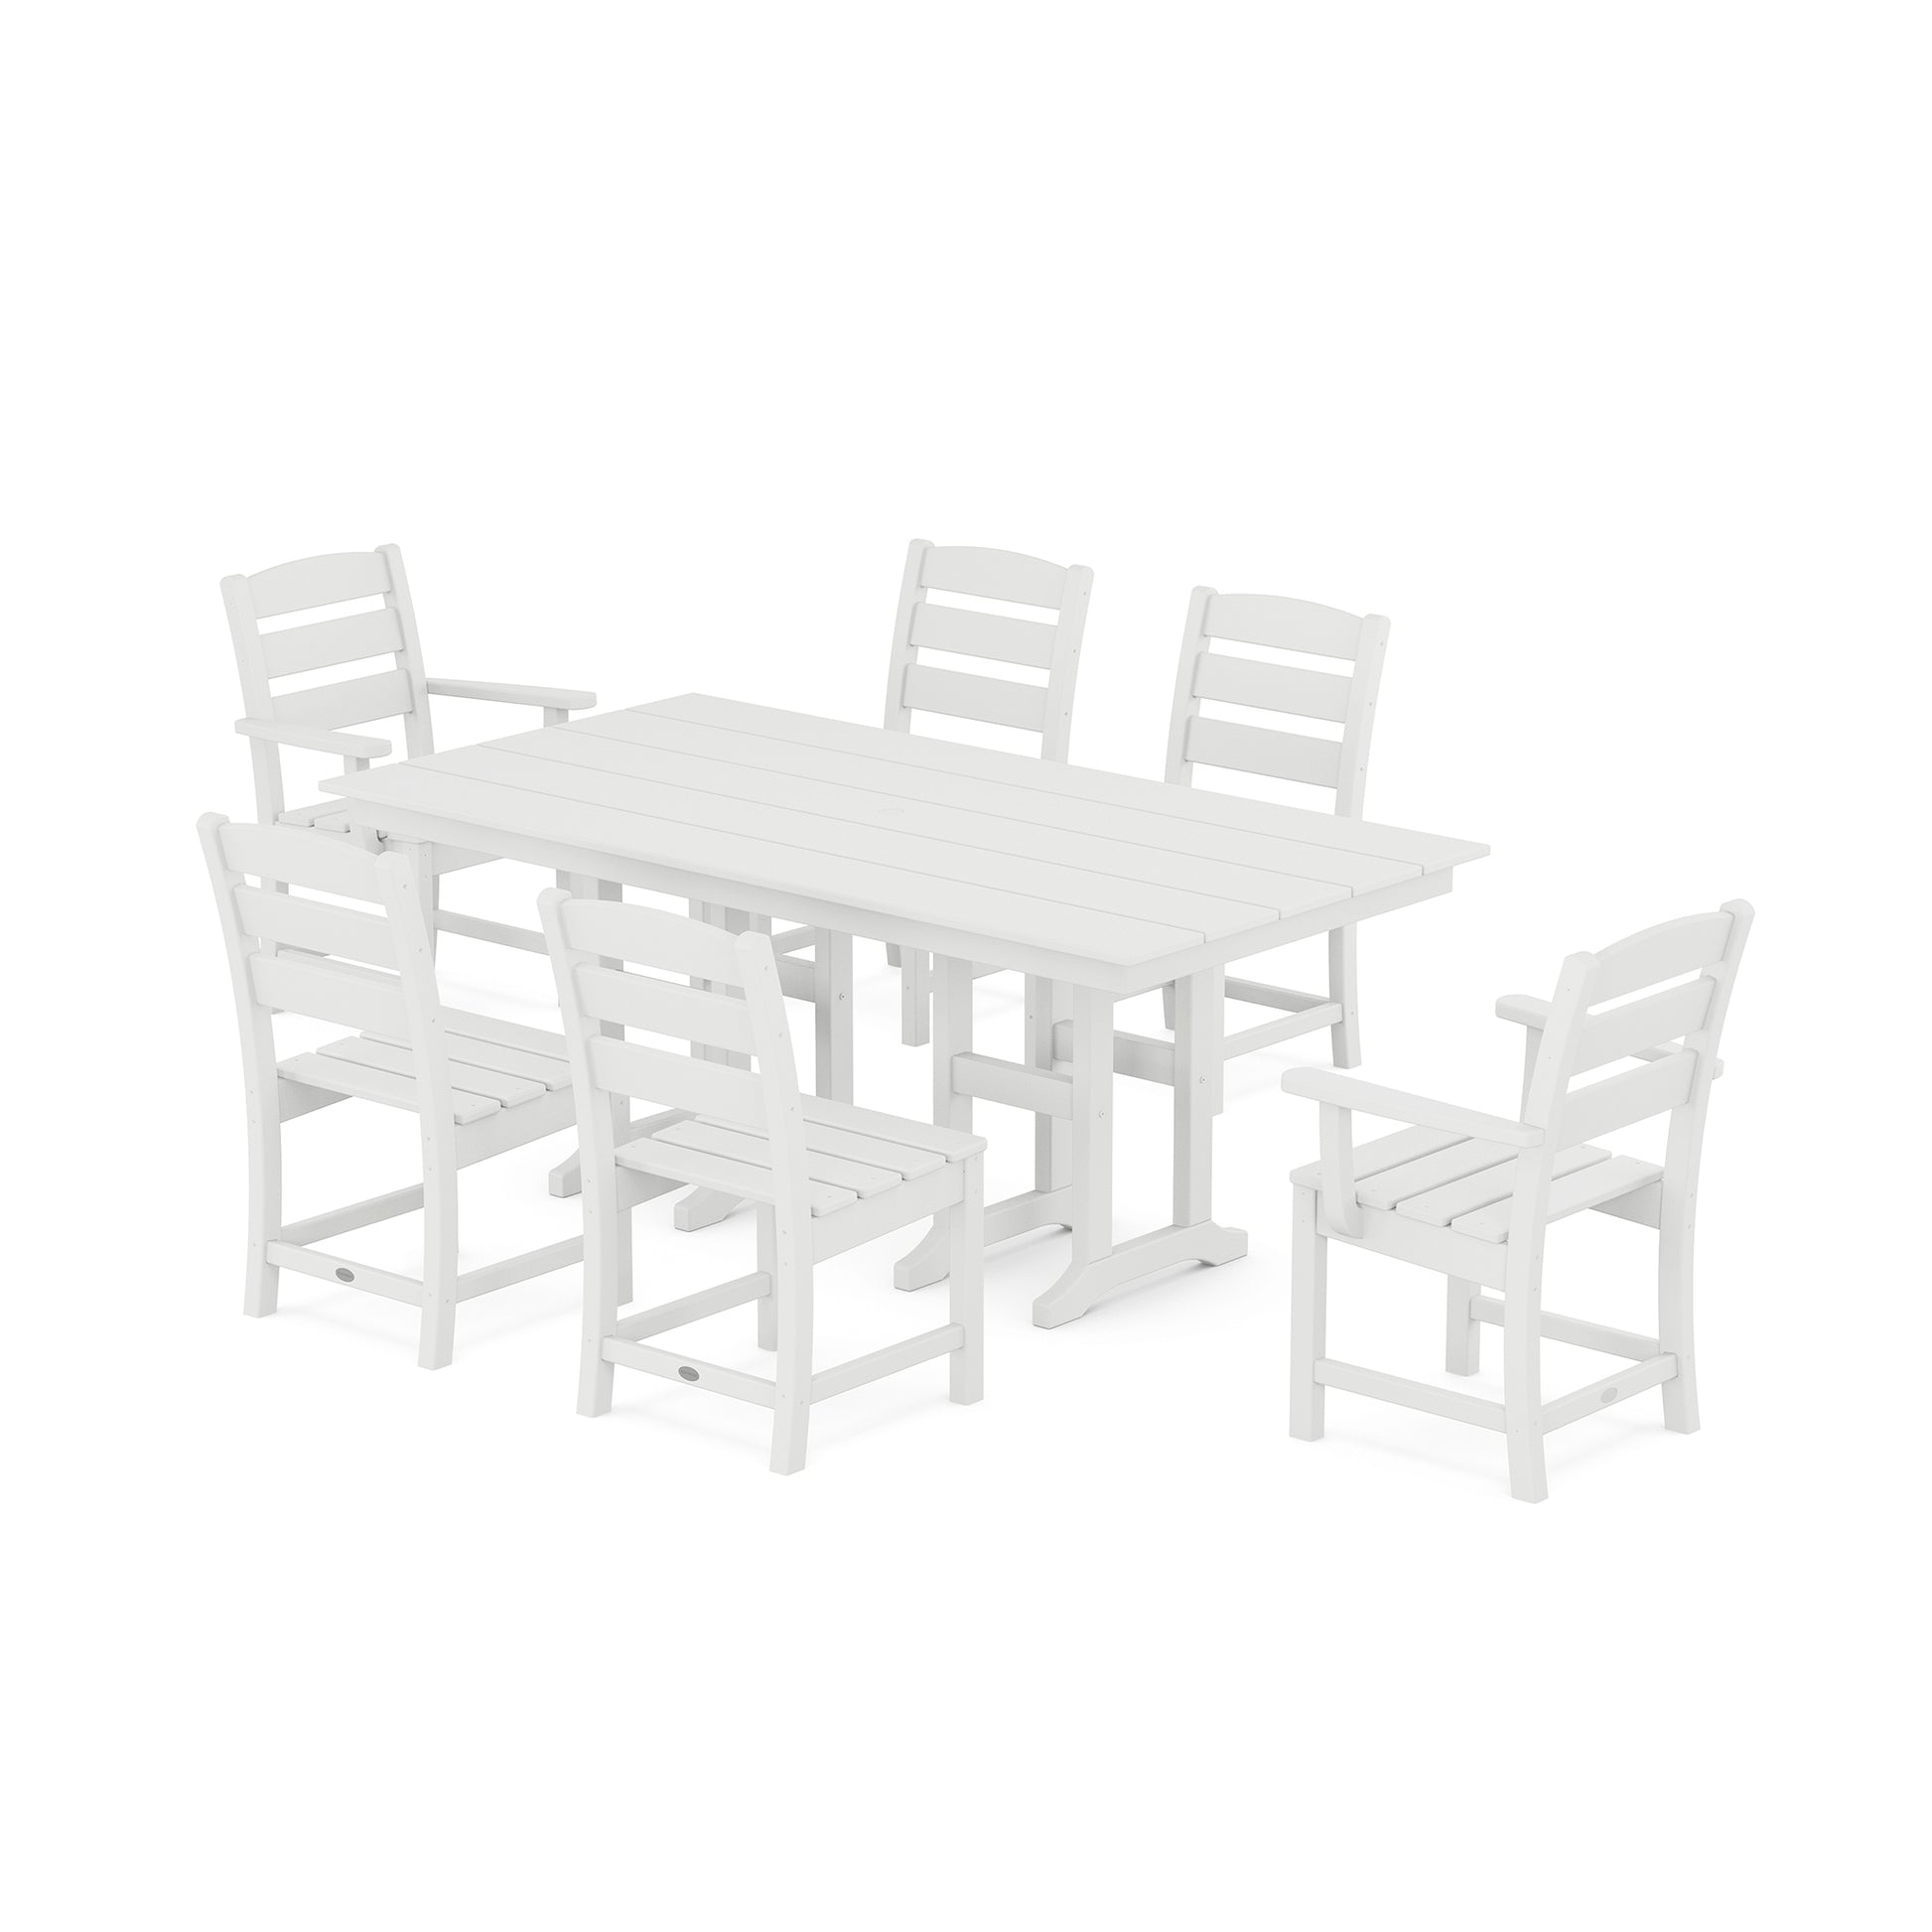 A white weather-resistant outdoor dining set consisting of a rectangular table and six matching chairs, all made of slatted plastic, isolated on a white background.